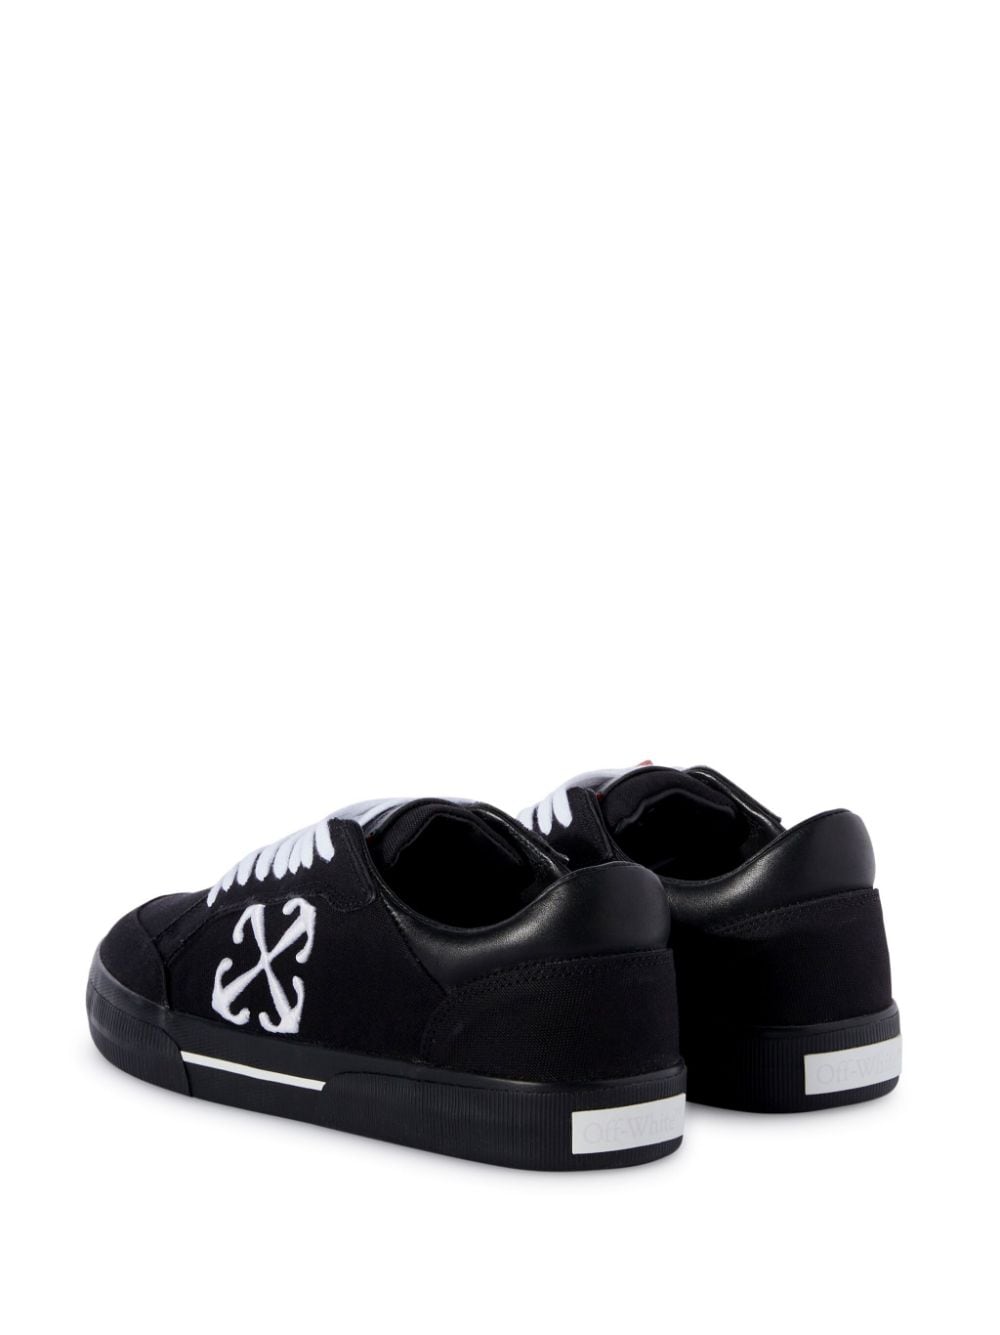 Vulcanized contrasting-tag canvas sneakers<BR/><BR/><BR/>